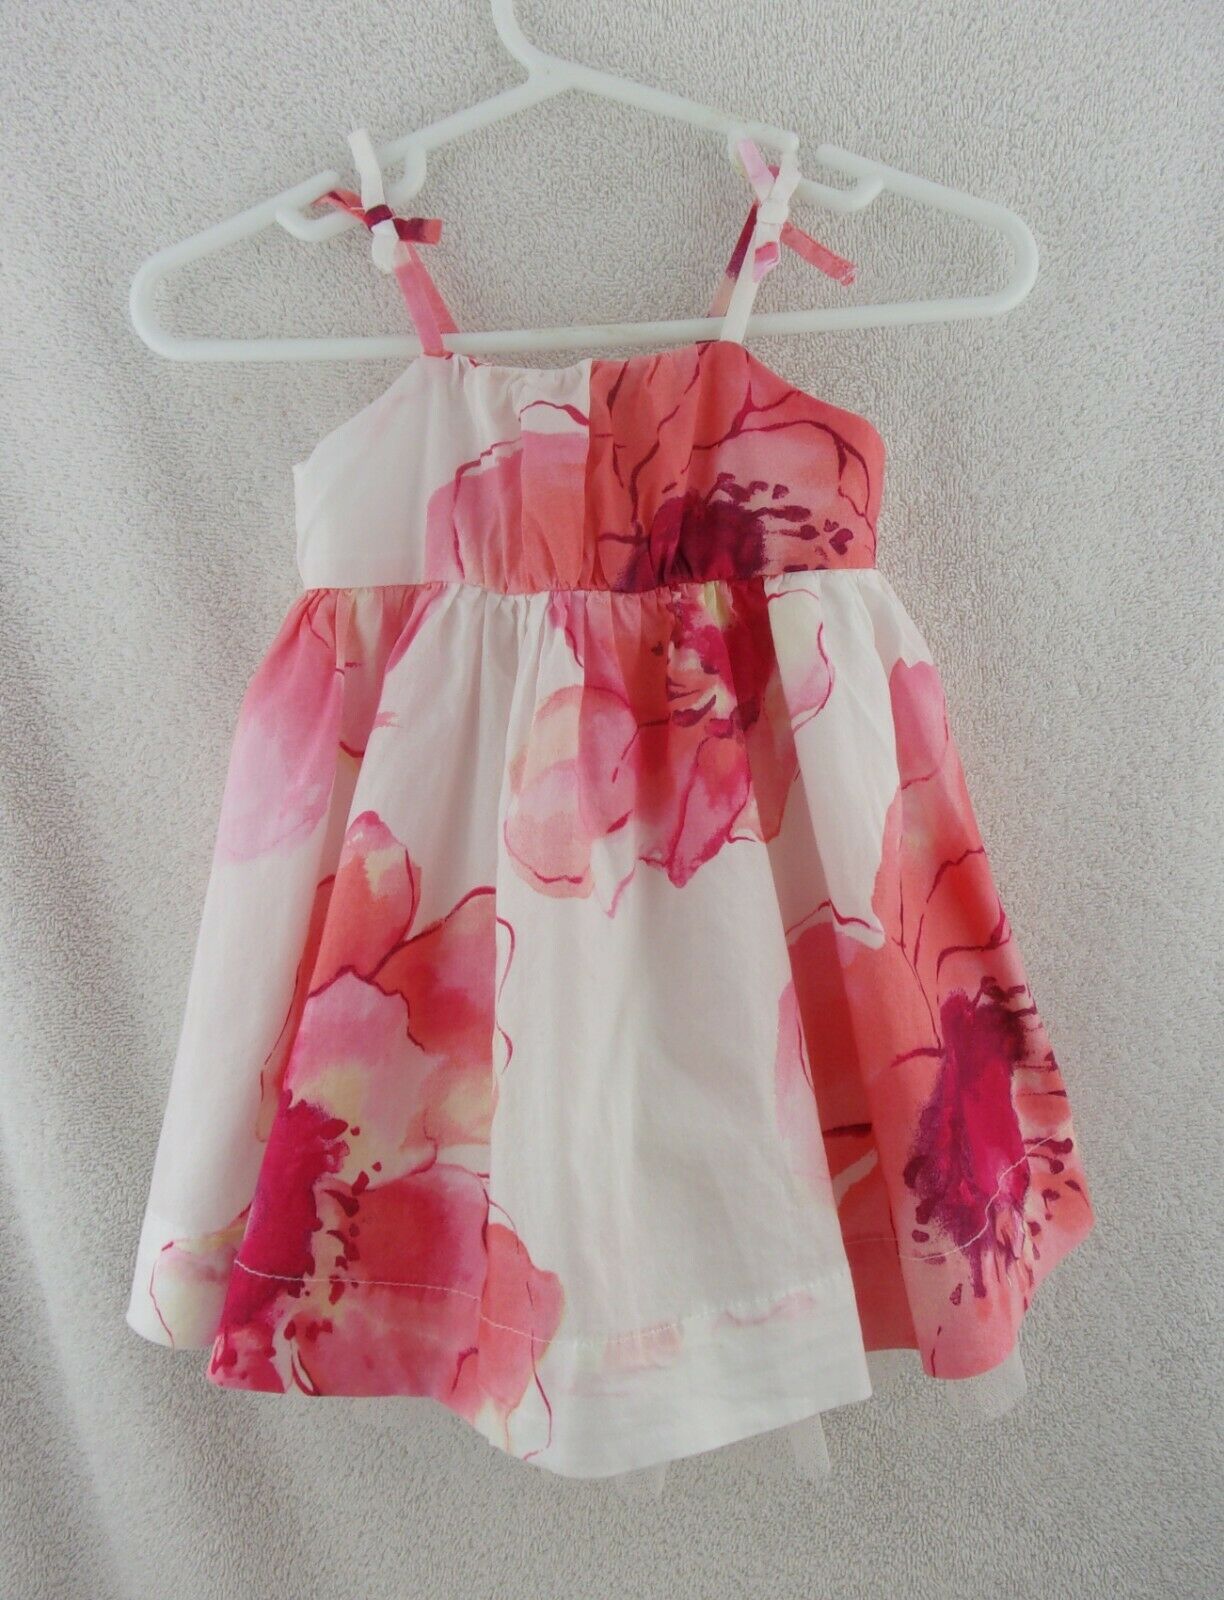 Doll Clothes Baby Gap Floral Dress 0-3 Months Infant Outfit 22